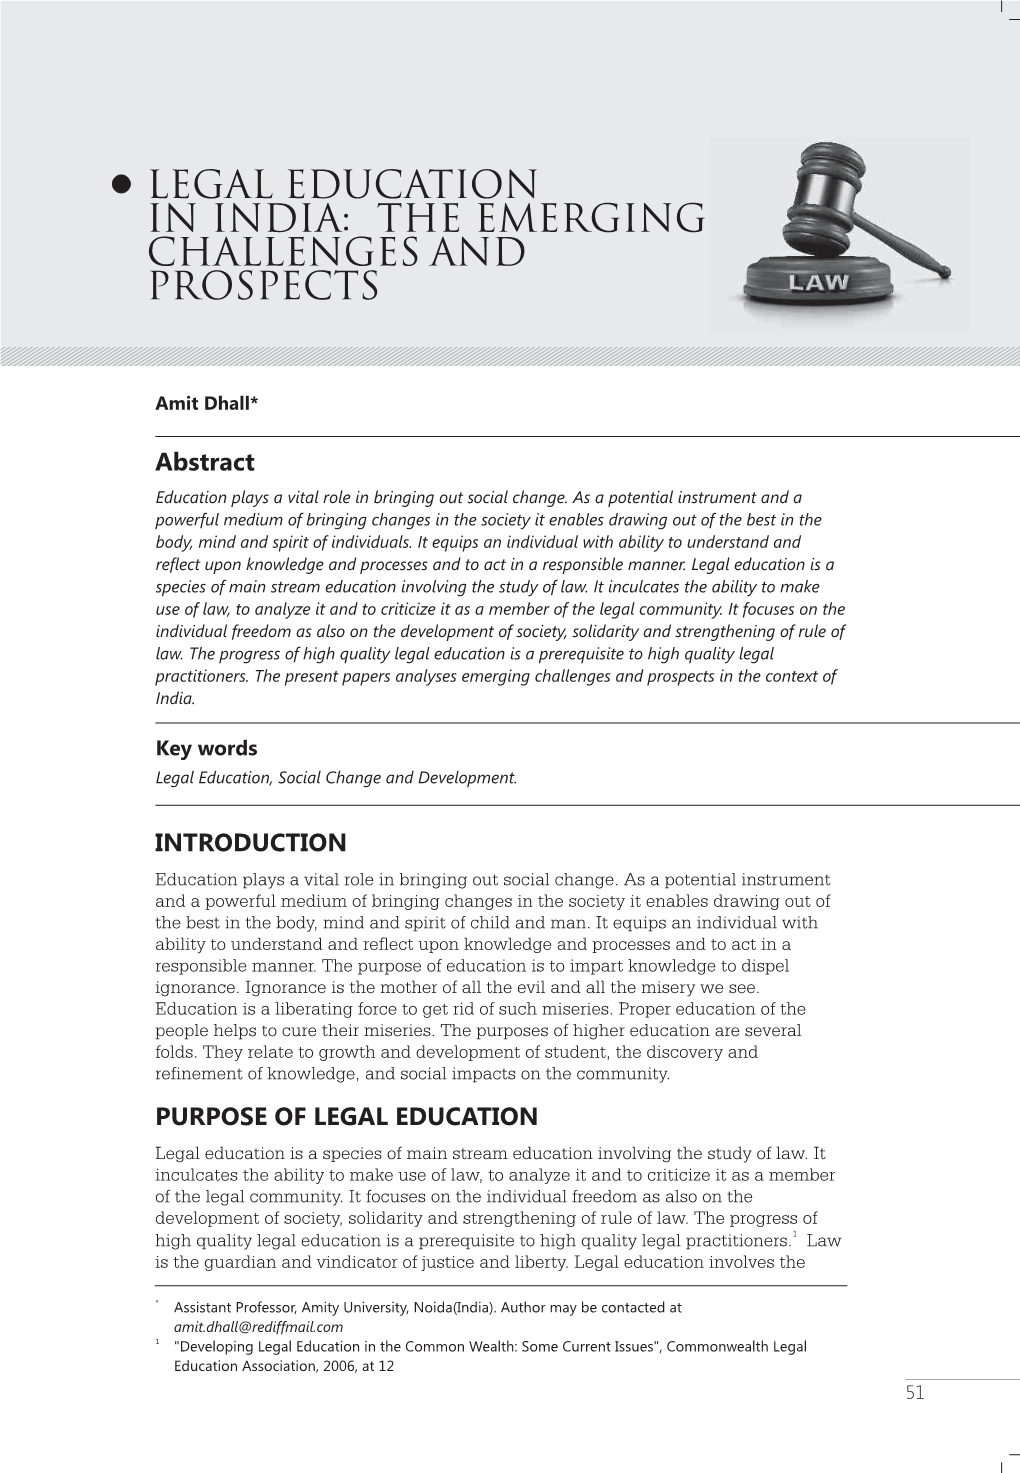 Legal Education in India: The